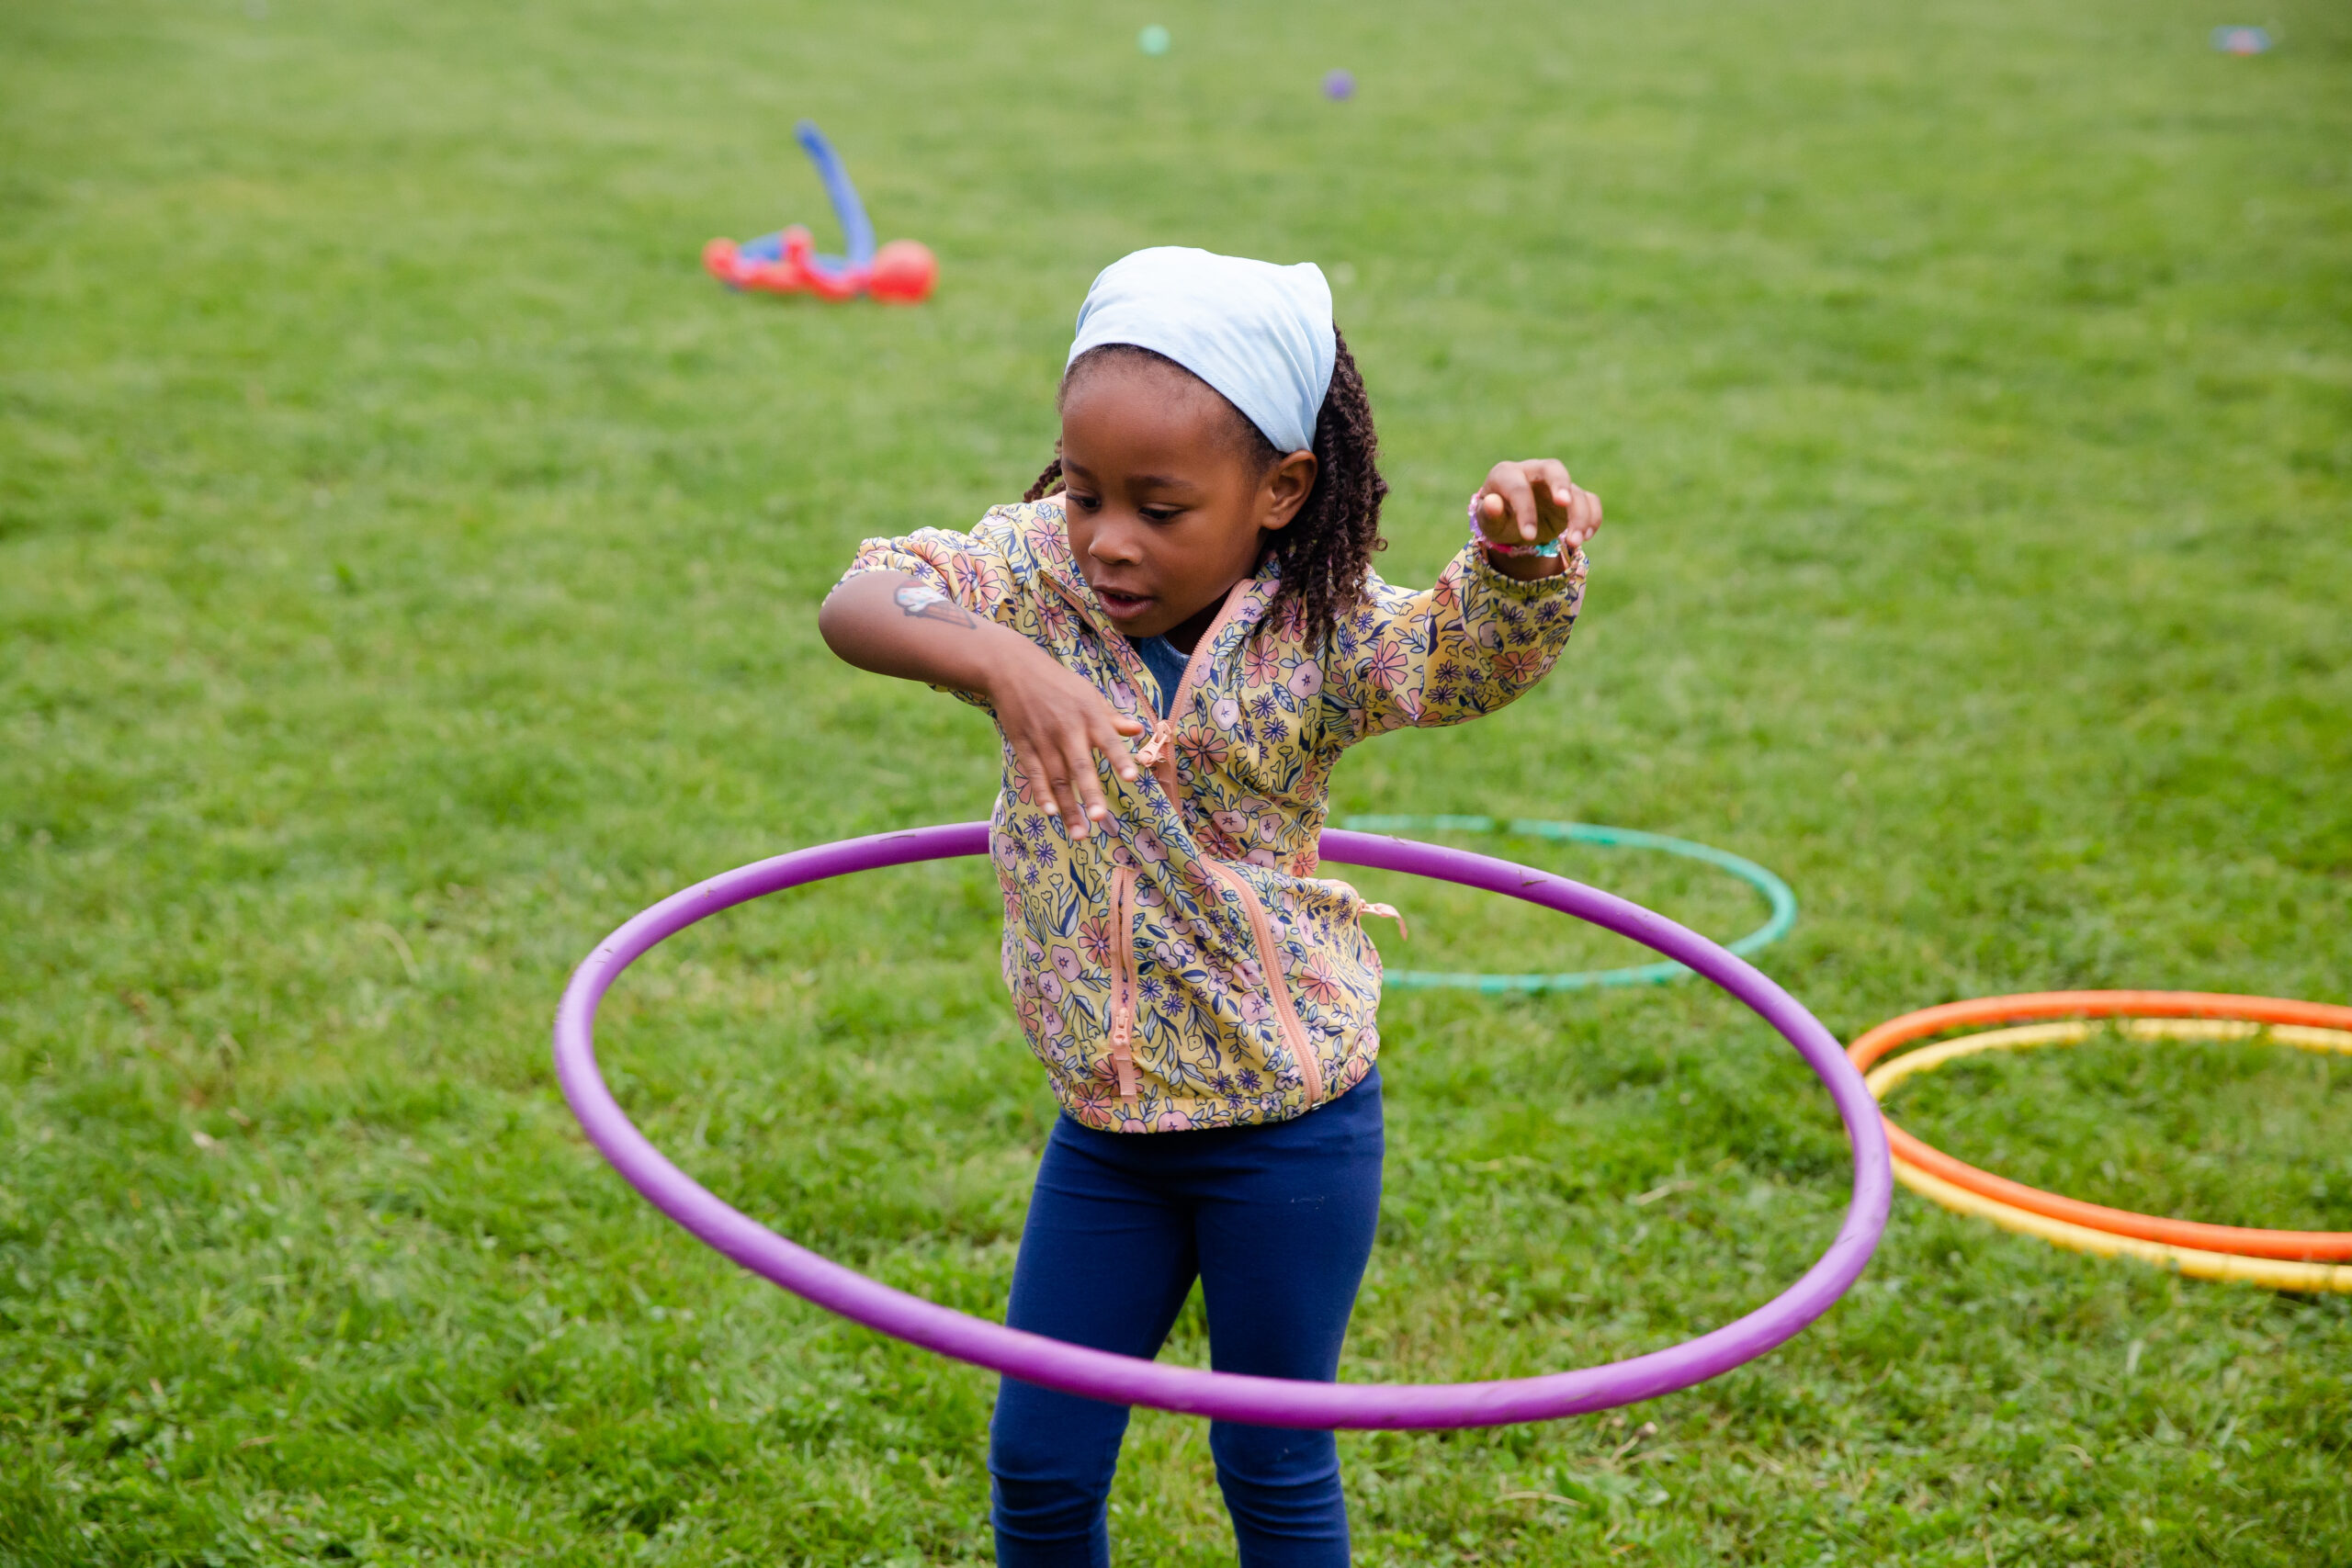 Study with Questionnaire Explores Field of Play